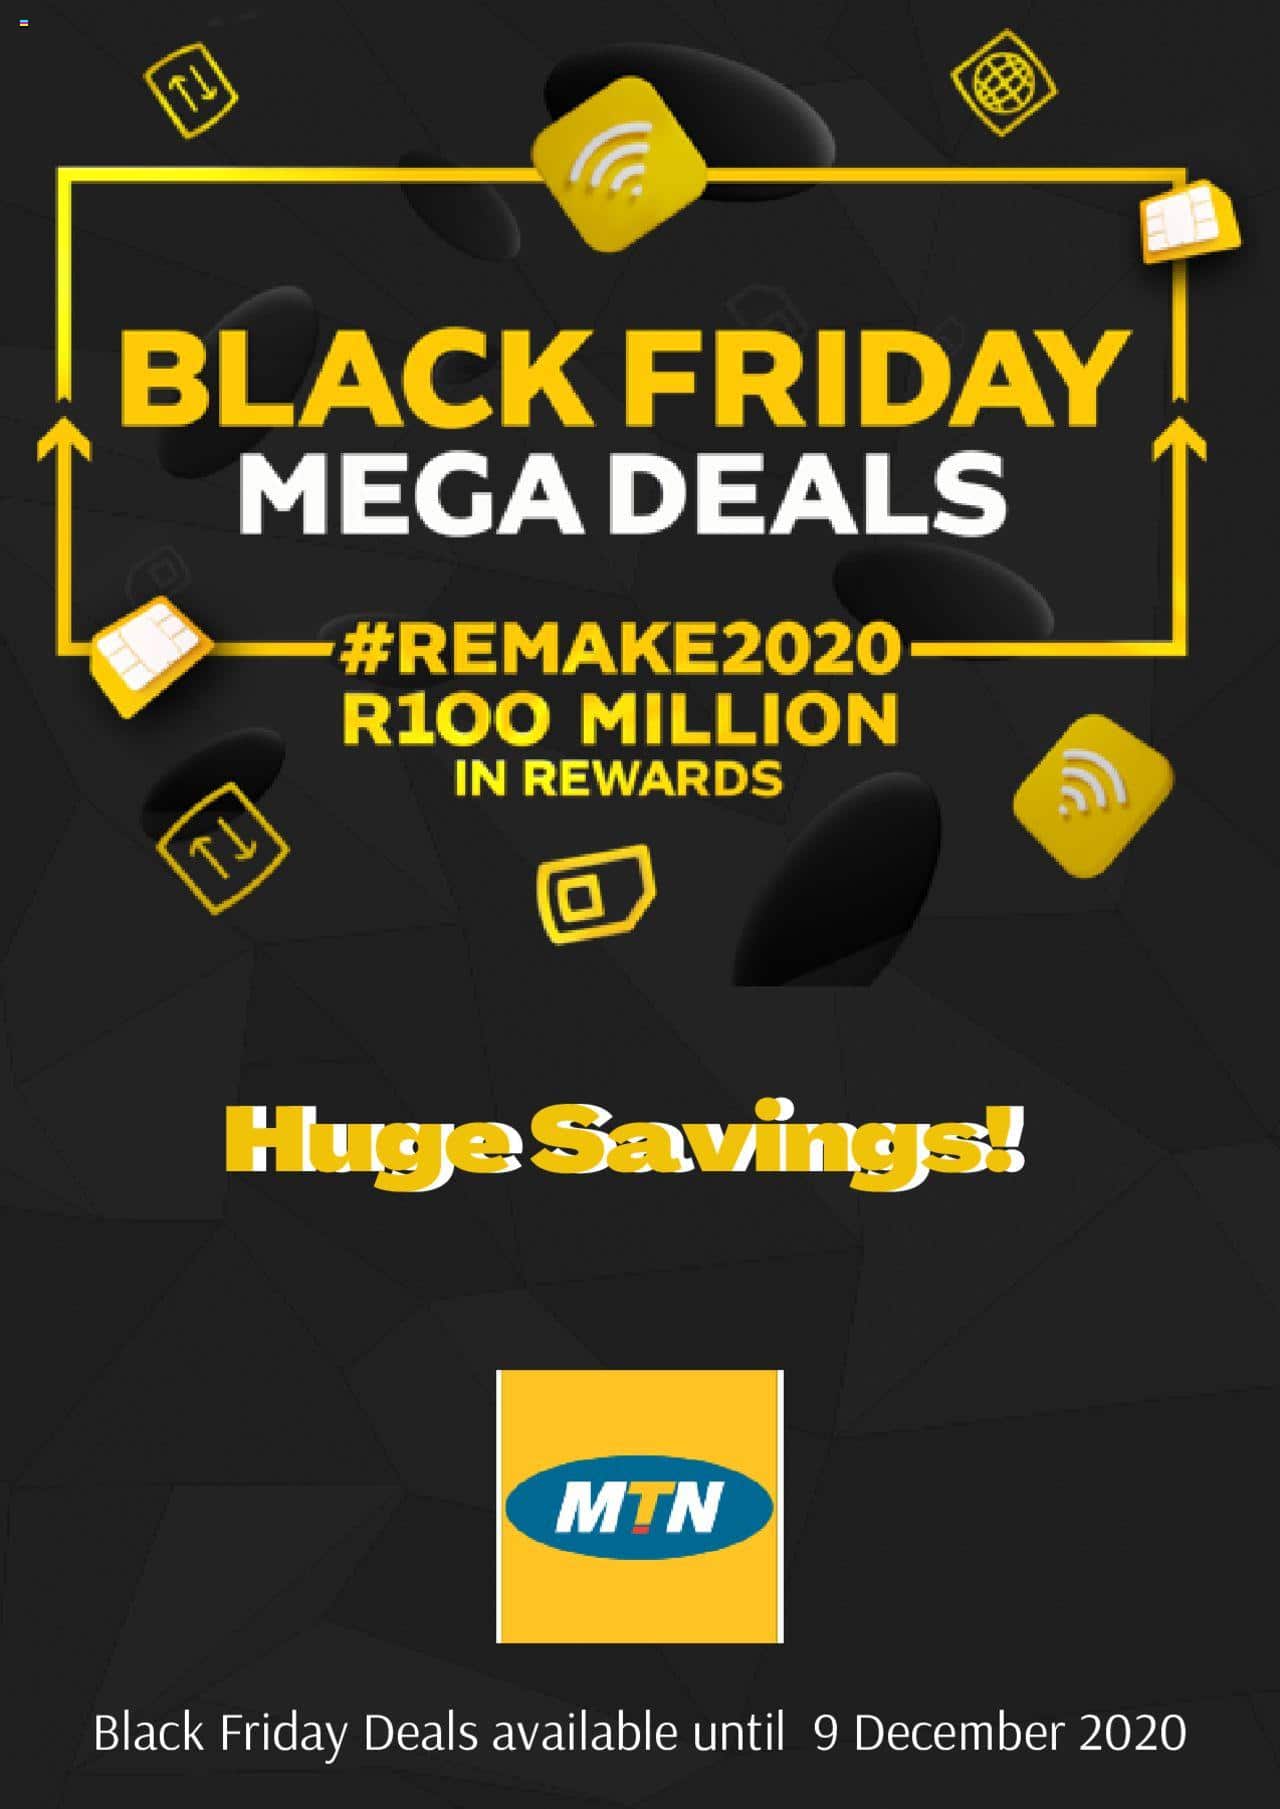 MTN Black Friday Deals & Specials 2021 - Will There Be More Deals On Black Friday